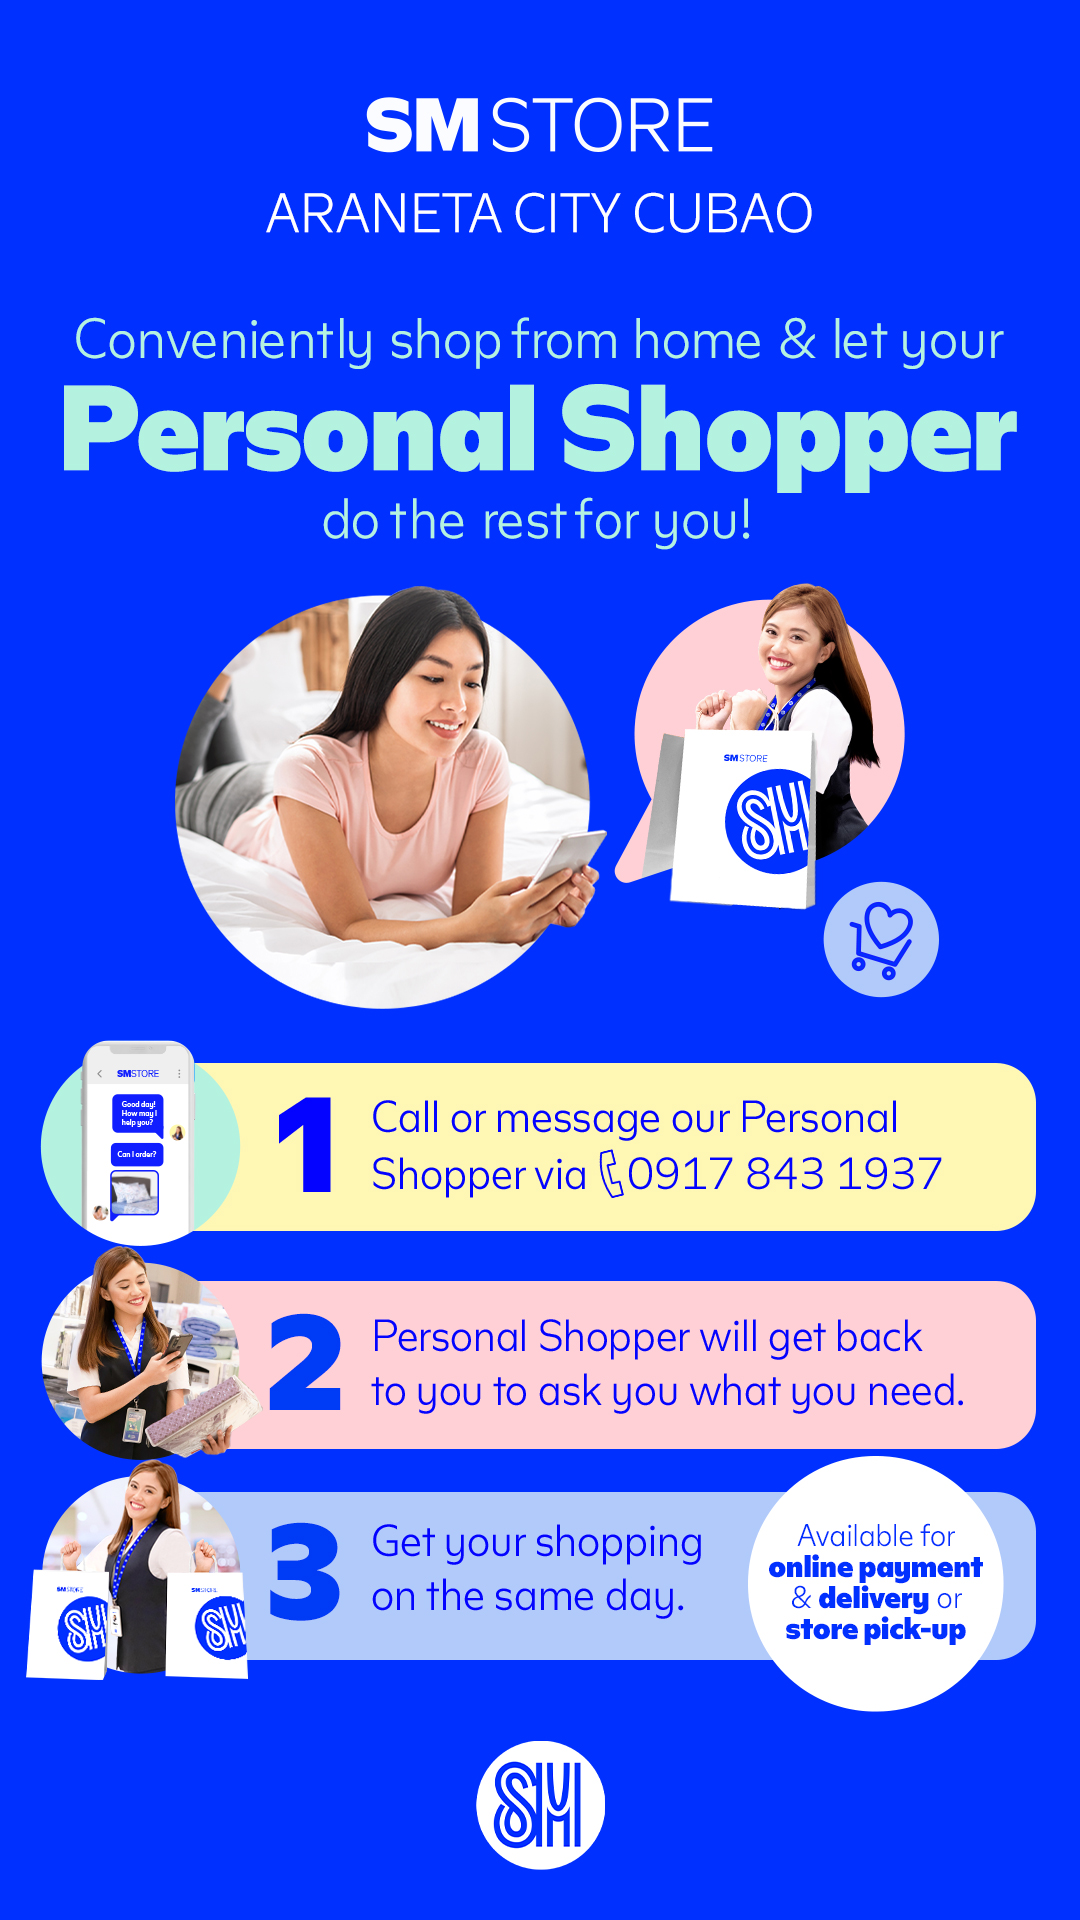 How to Order from Personal Shopper Araneta City